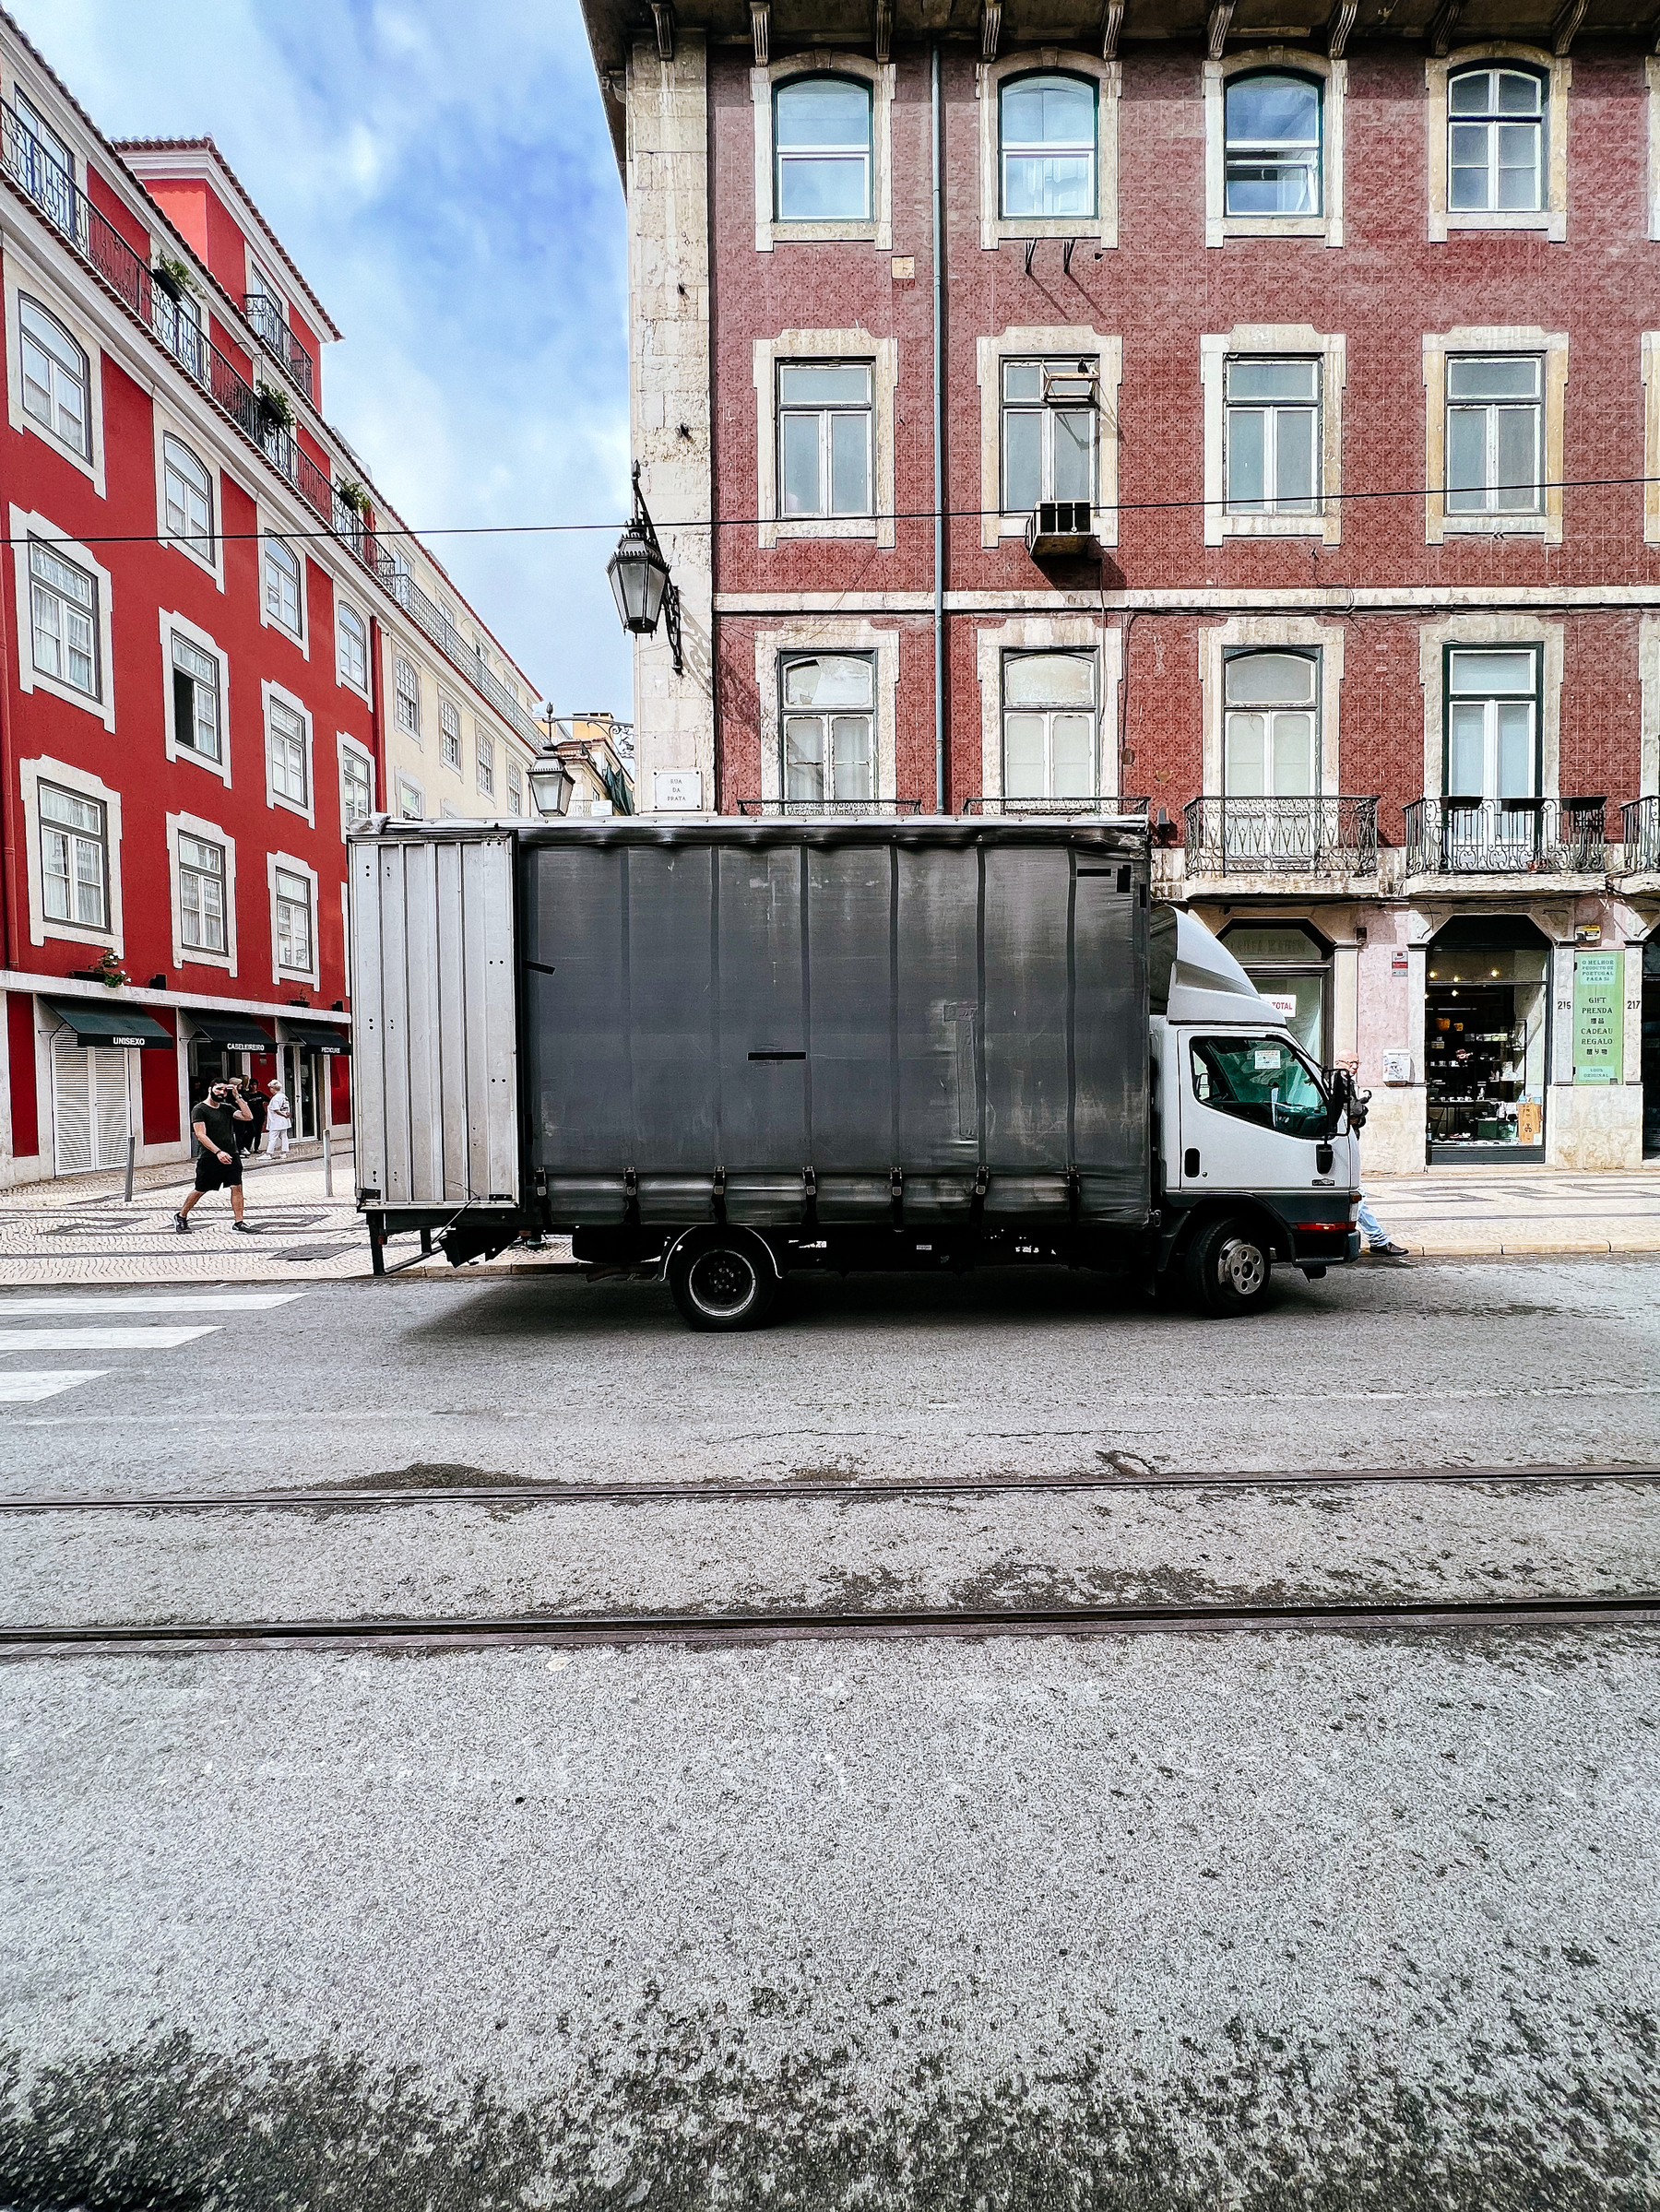 A truck is parked in a street.